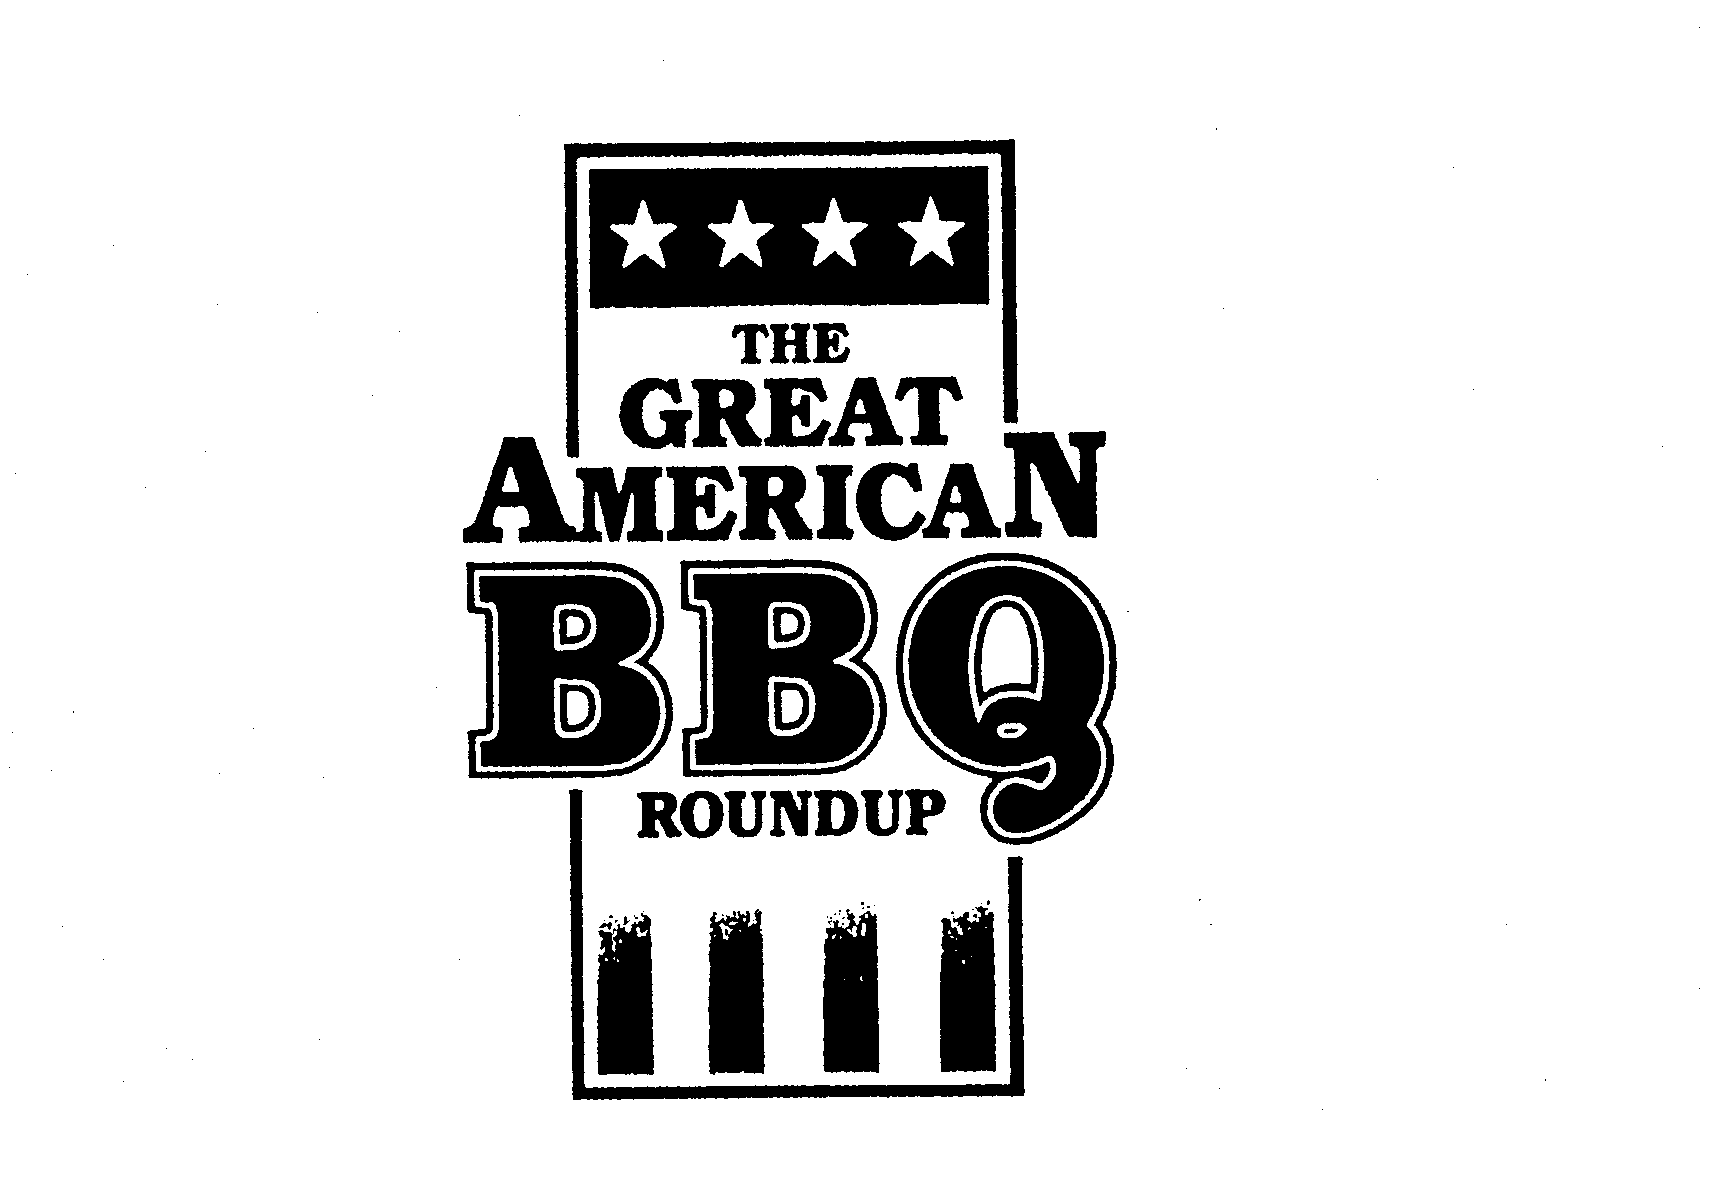  THE GREAT AMERICAN BBQ ROUNDUP